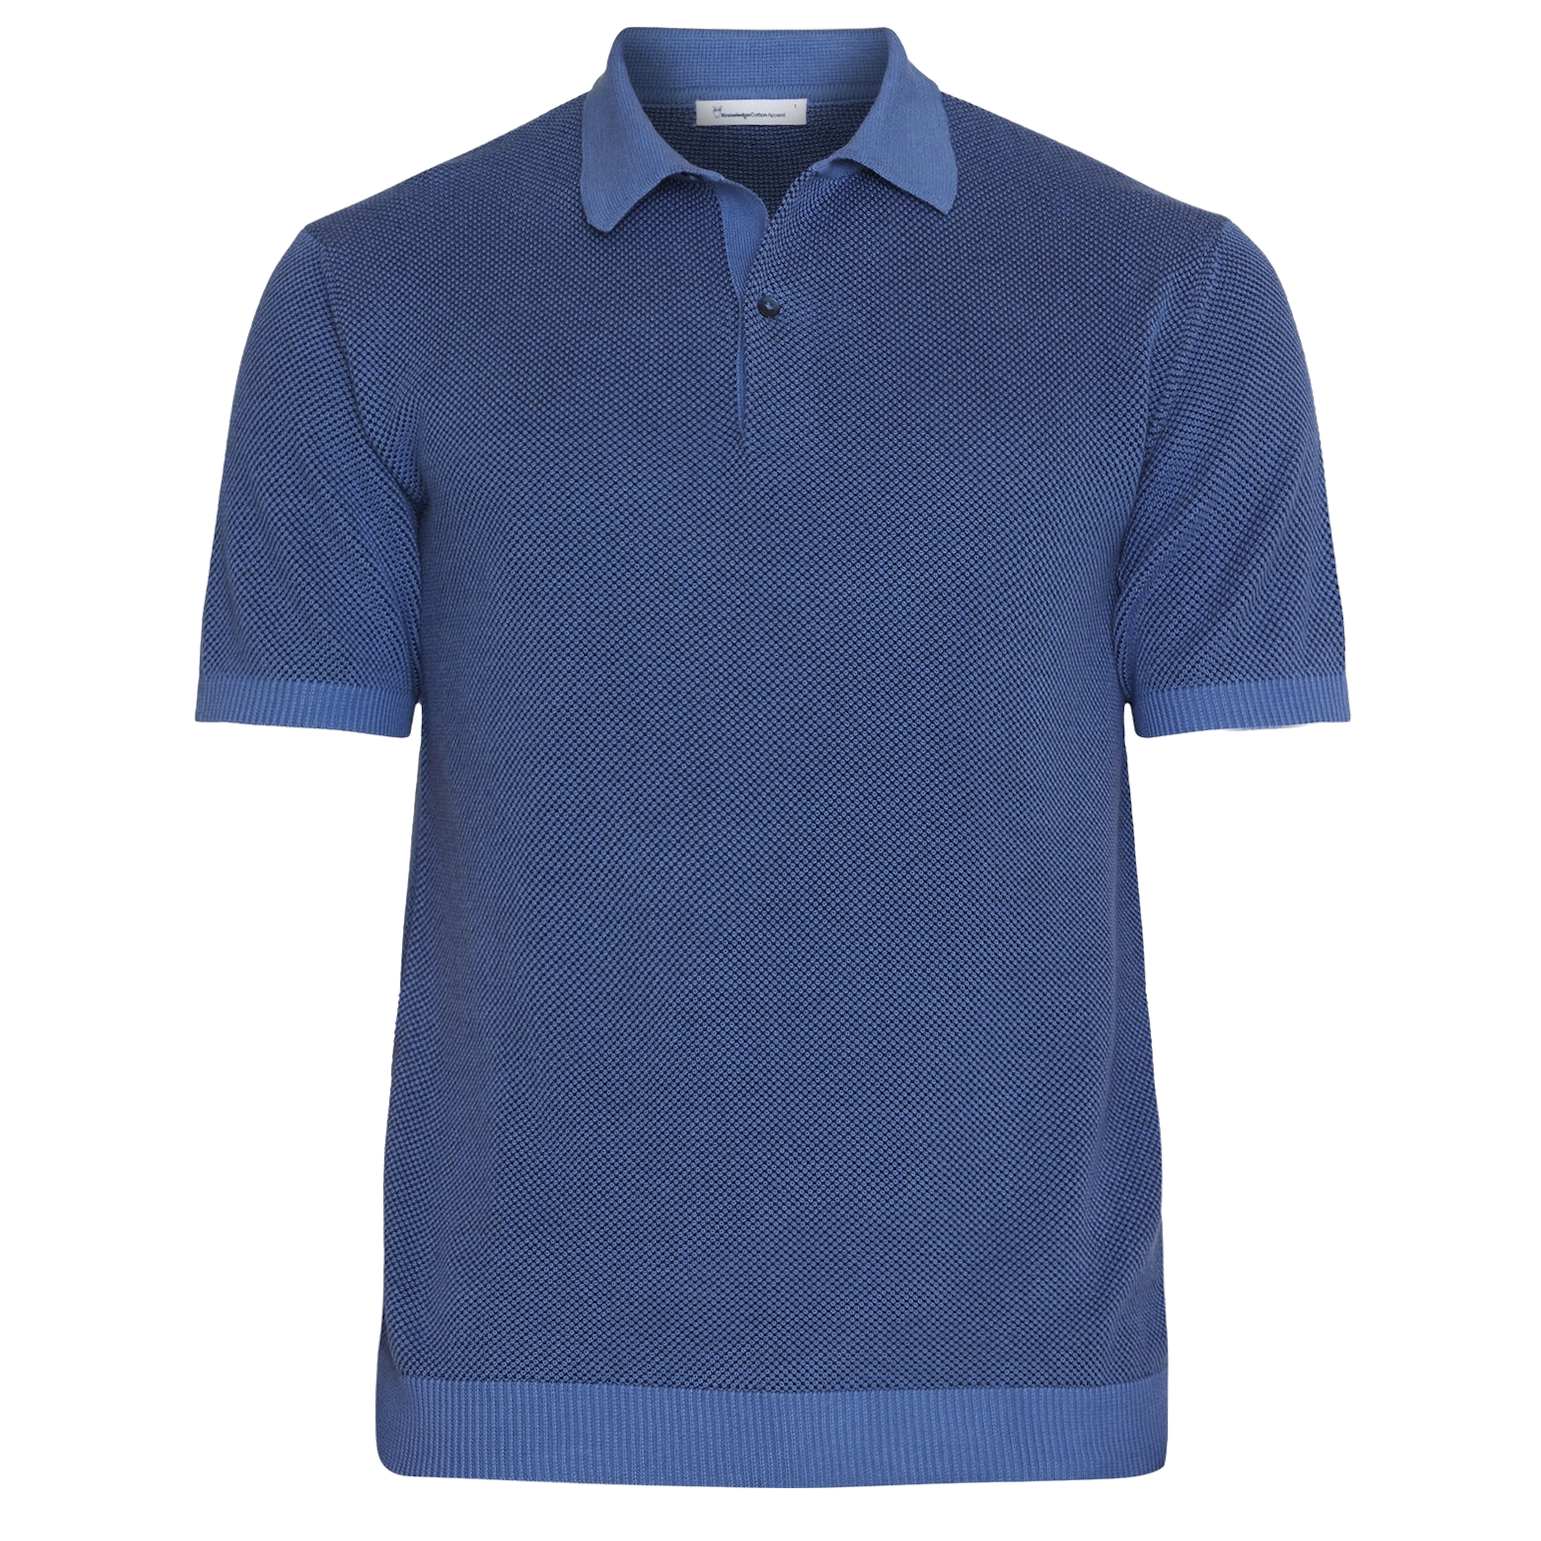 KnowledgeCotton Apparel KnowledgeCotton, Two Tone Polo, moonlight blue, L